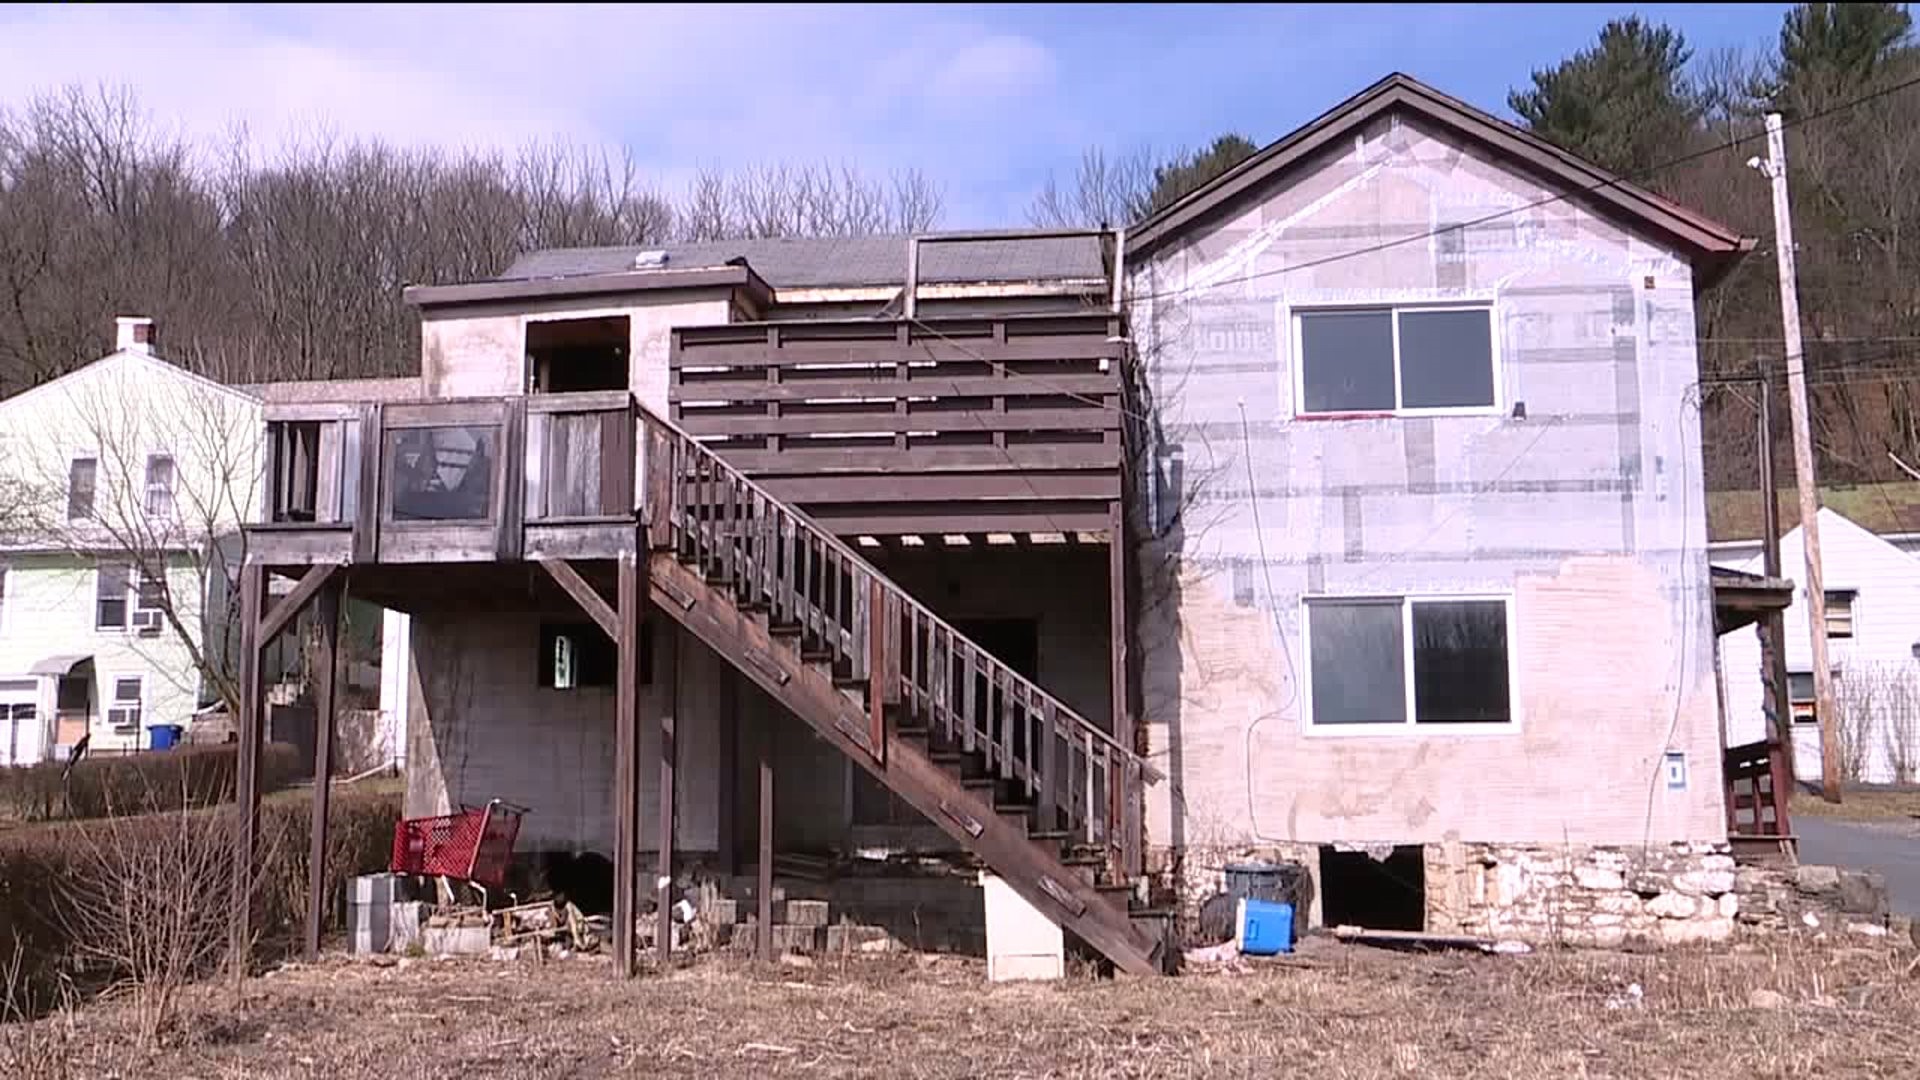 Blighted House Raising Concerns for Neighbors in Cressona